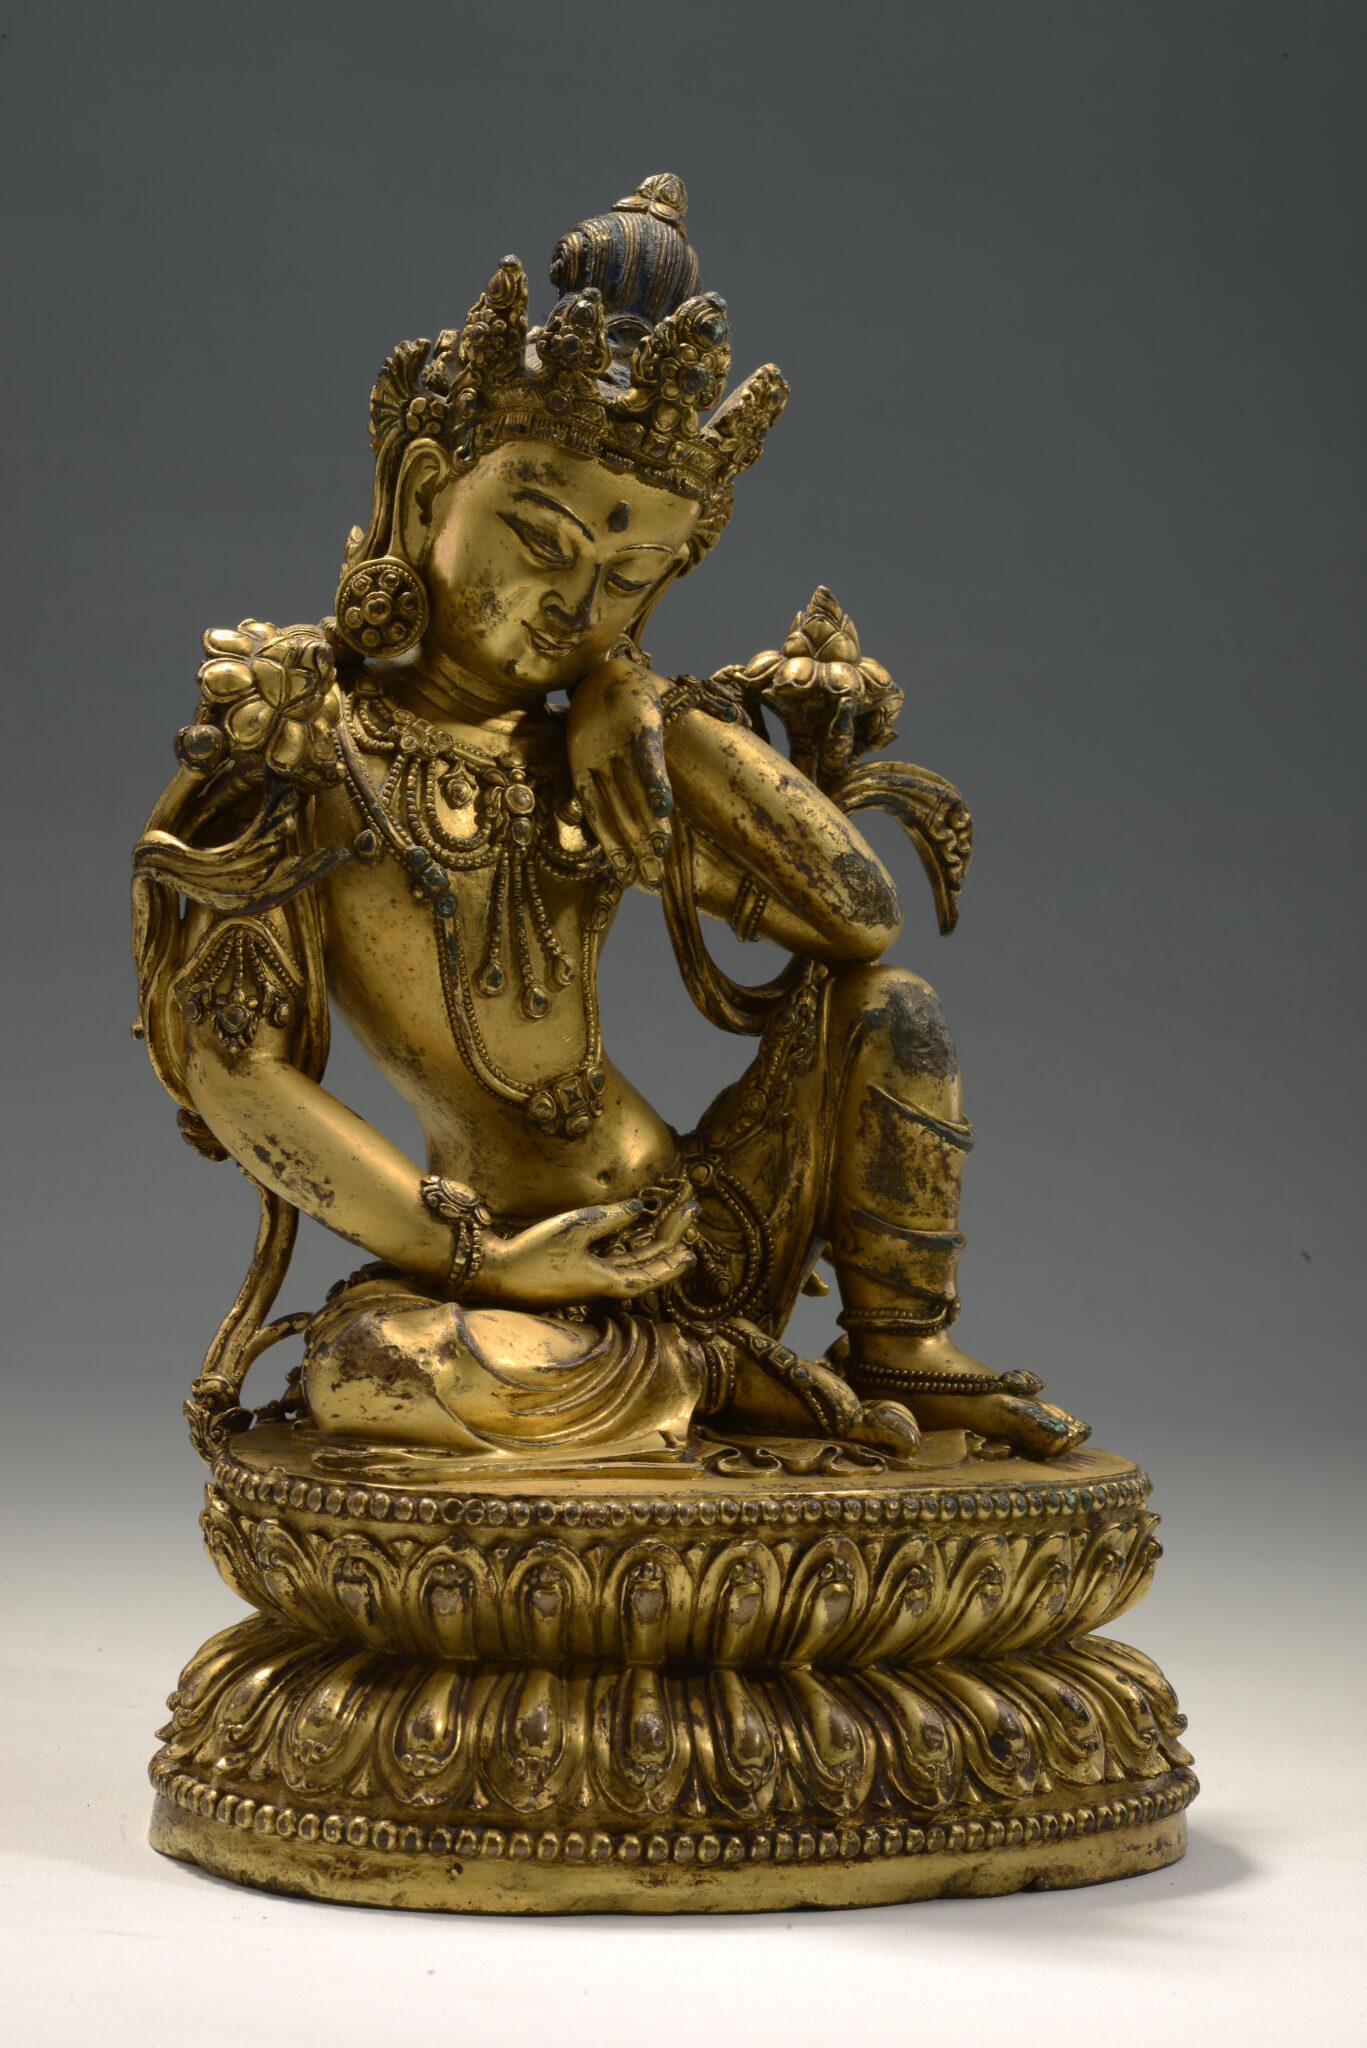 Gilded statuette of seated Bodhisattva with dramatically curved torso wearing elaborate crown and finely articulated accessories